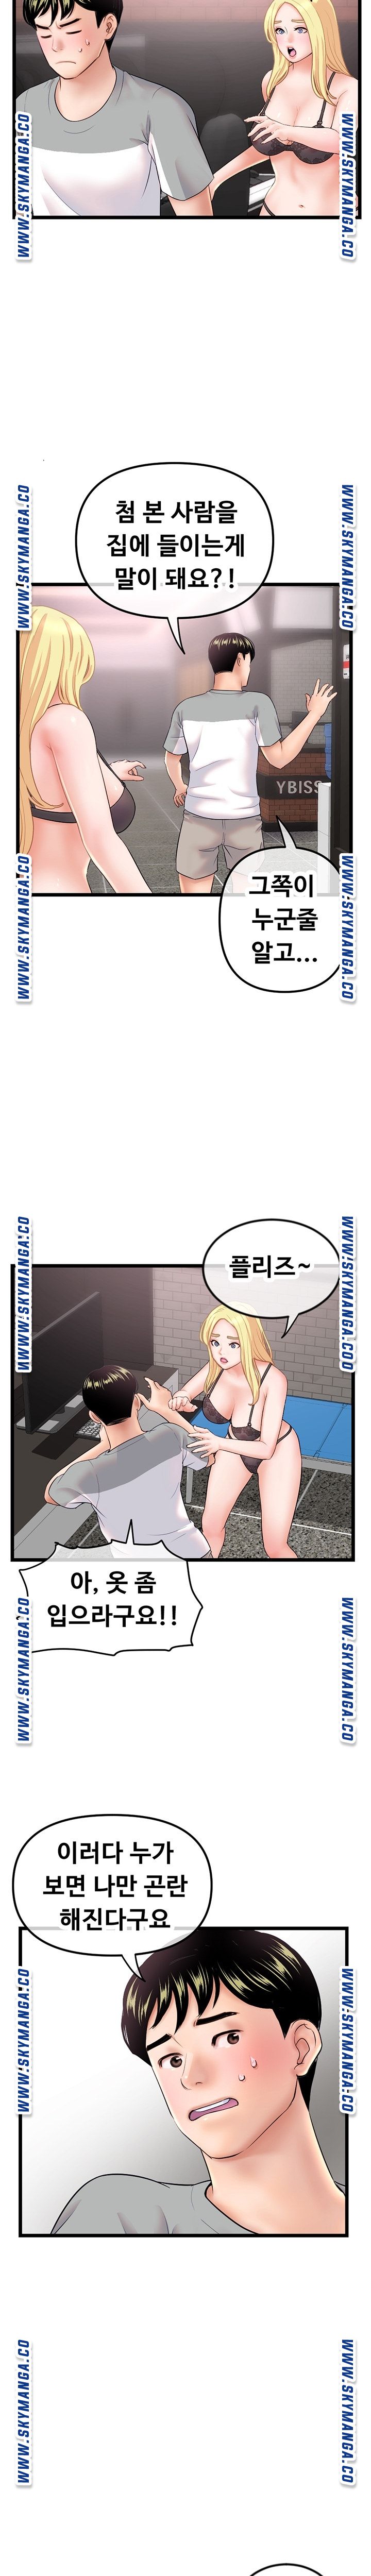 Late night PC Room Raw - Chapter 31 Page 10